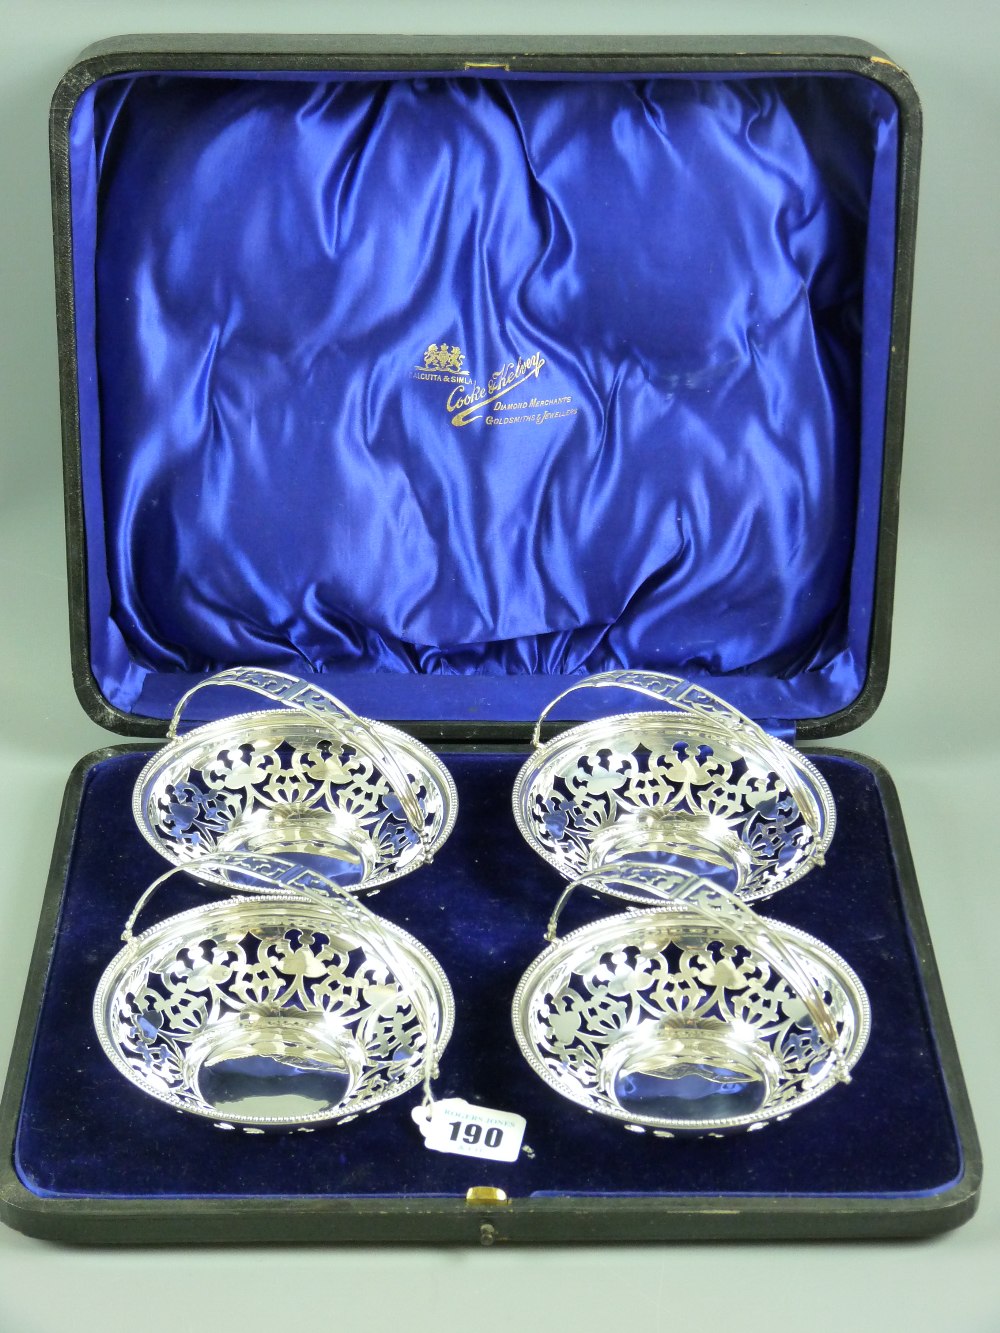 Silver swing handled bon bon dishes, a set of four with pierced bowls and handles with beaded rim